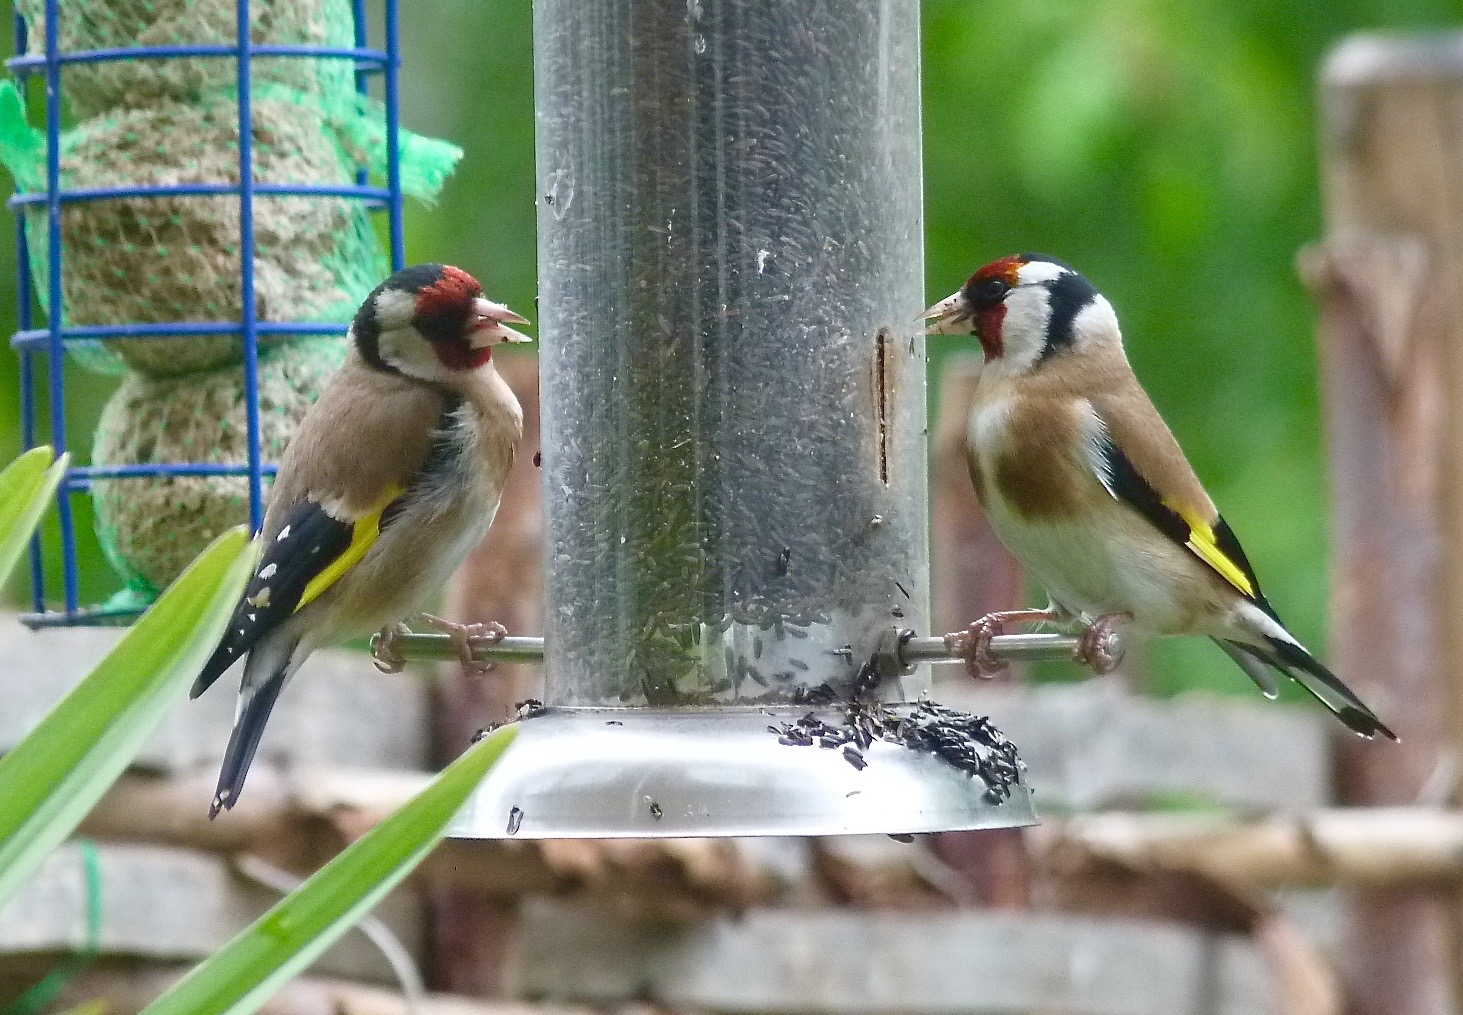  These are Olive Daddy's favorite birds. They are called Goldfinches. I don't see what the big deal is. Do you think they're pretty? 